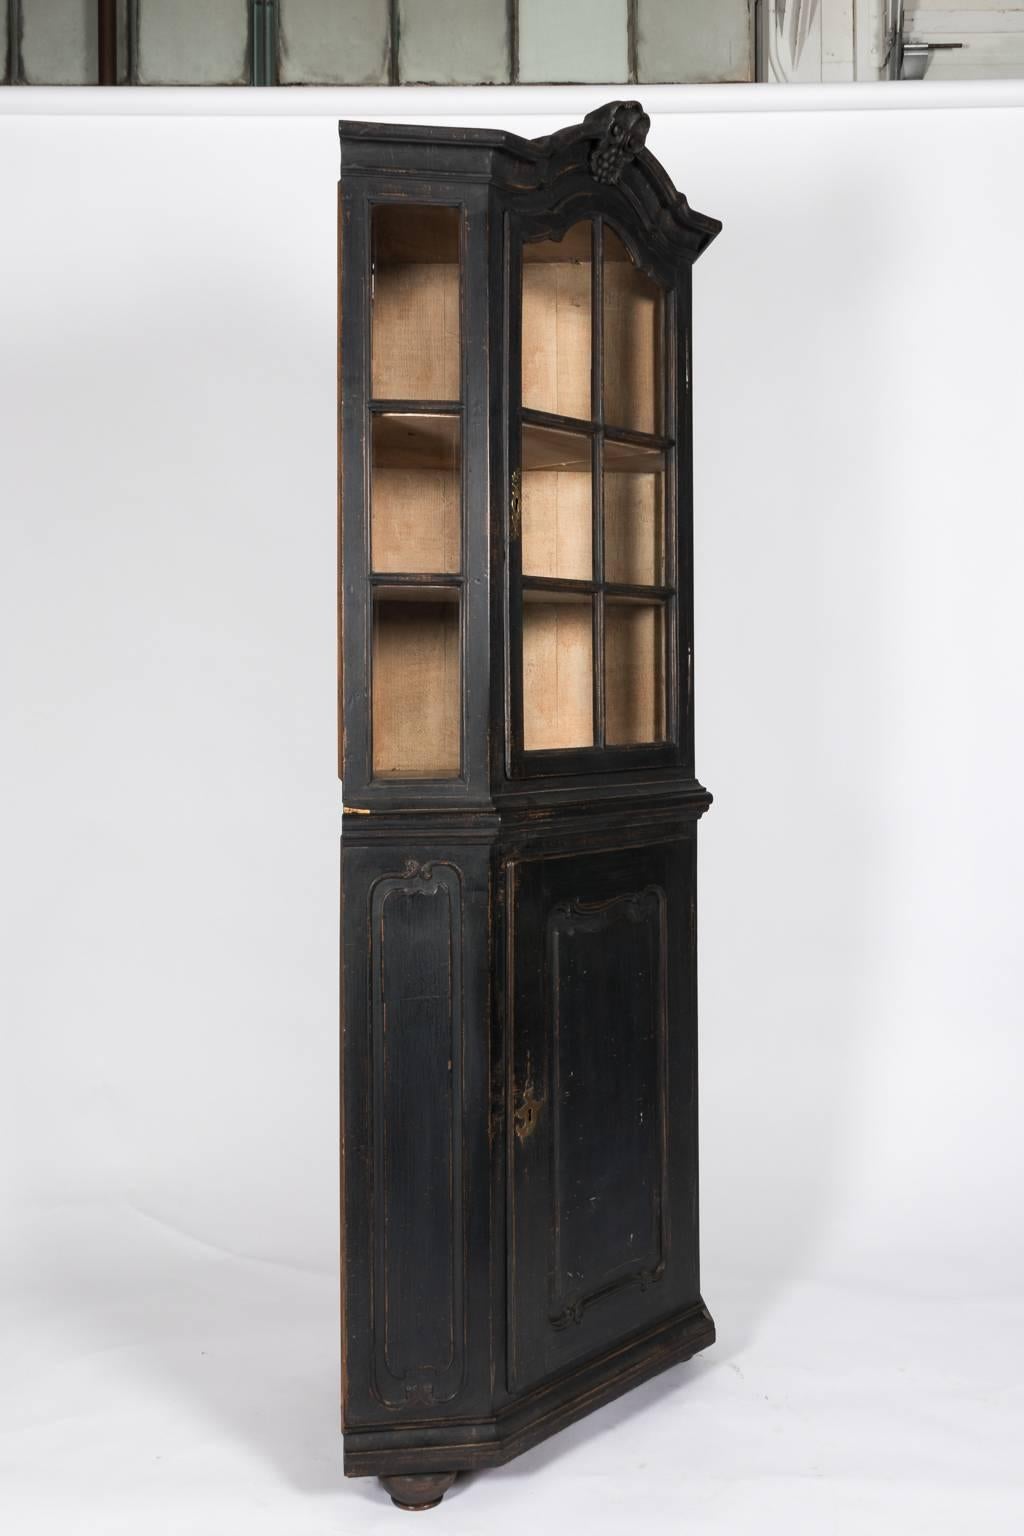 Black painted Rococo style corner cabinet with glass fronts and a curved top, circa late 18th century. The bottom features a profiled door.
 